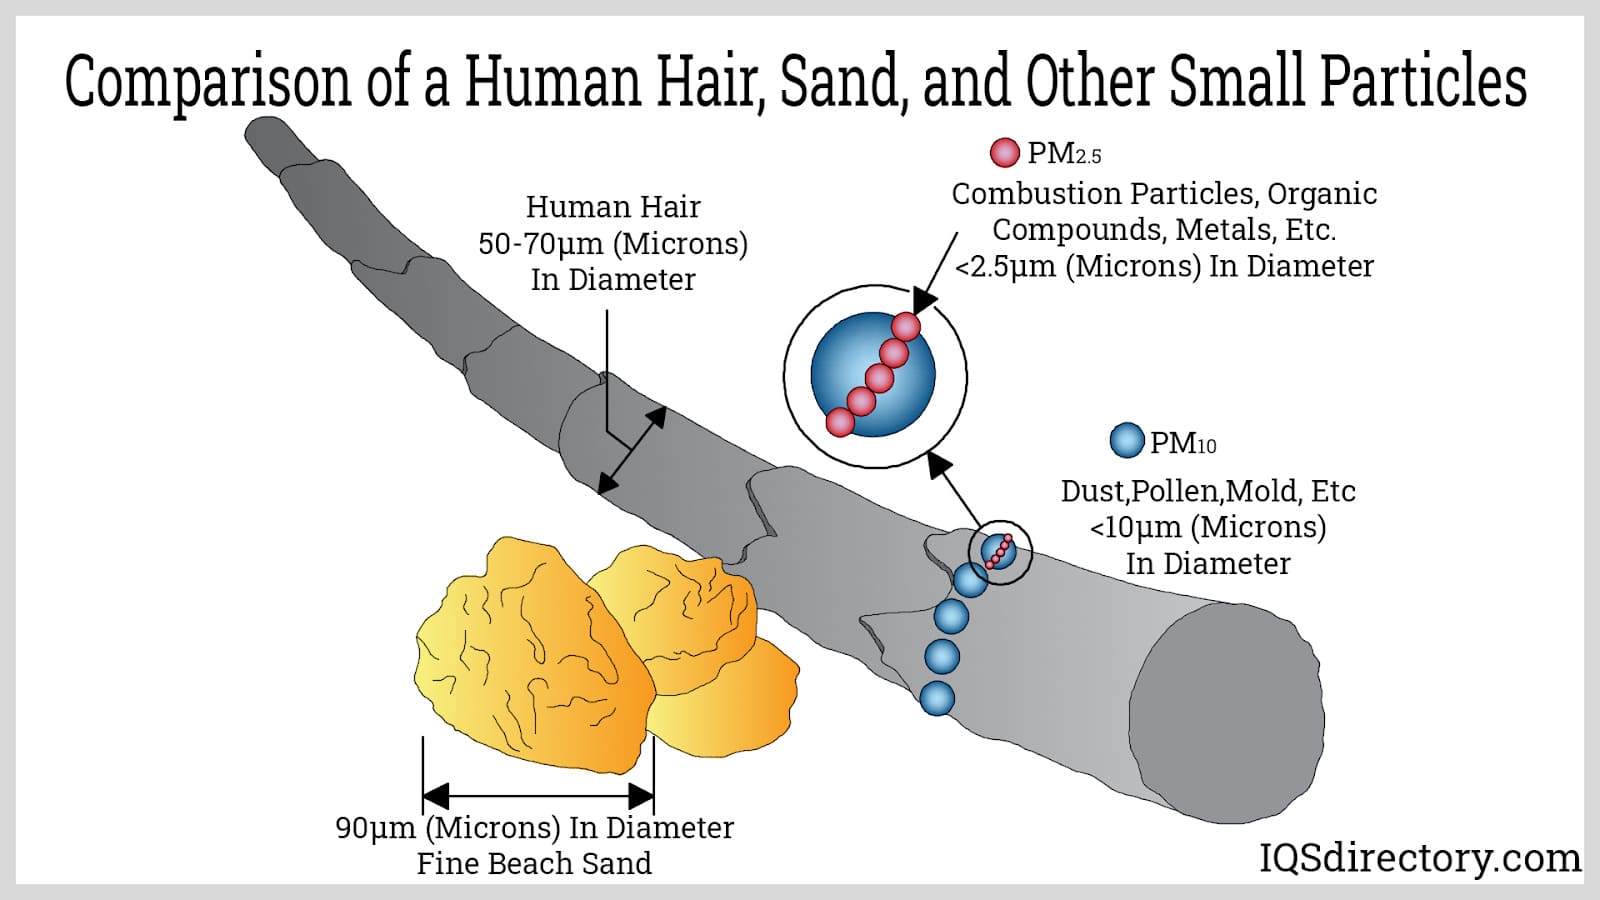 Comparison of a Human Hair, Sand, and Other Small Particles